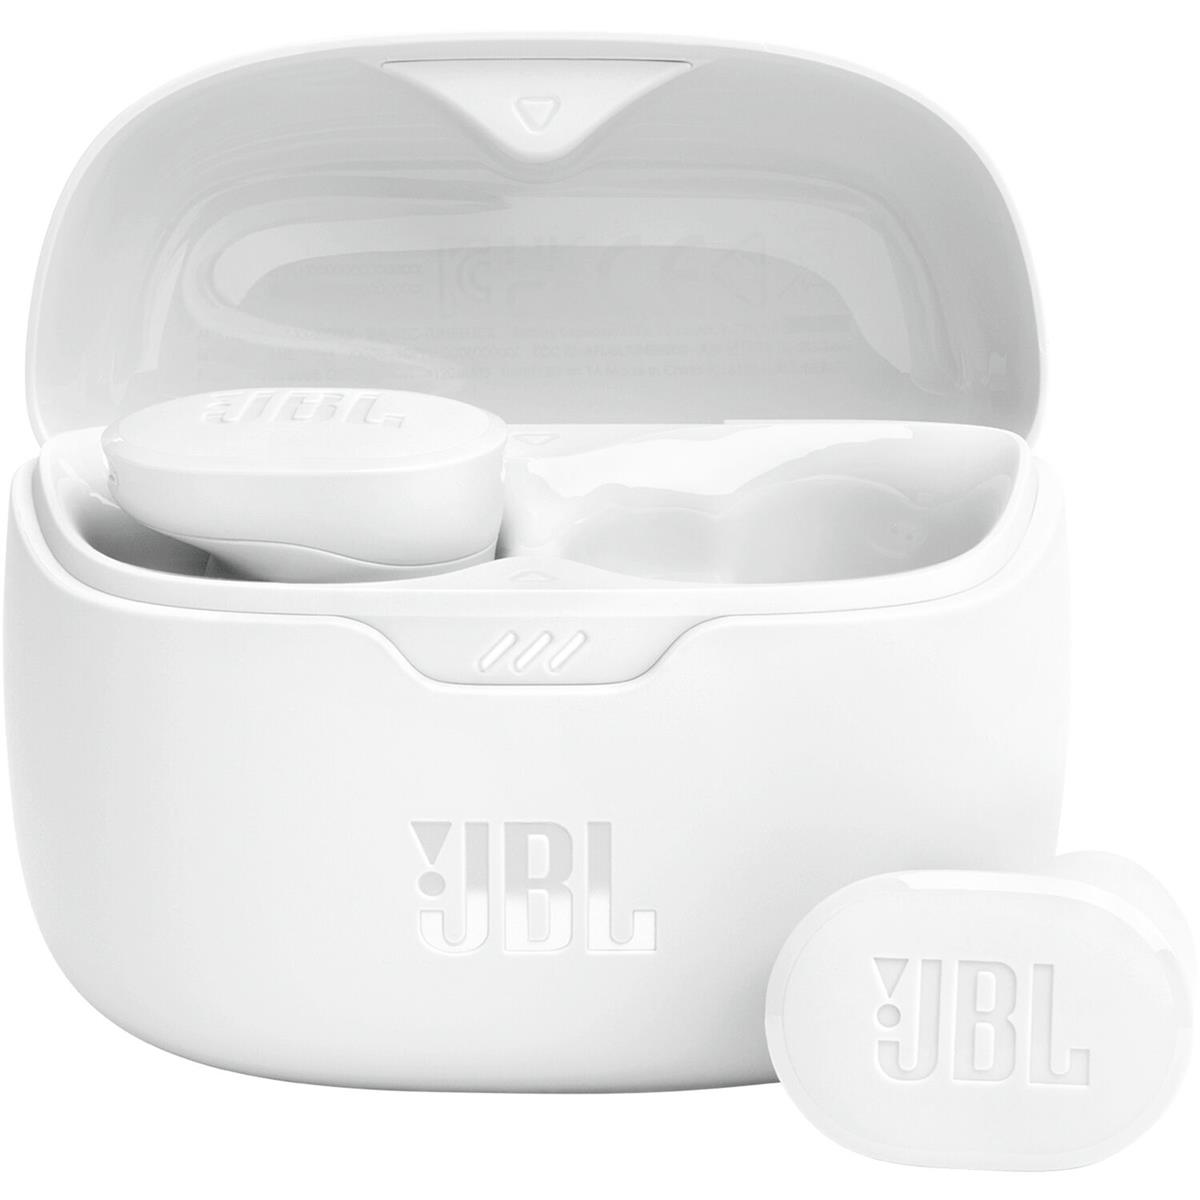 Image of JBL Tune Buds True wireless Noise Cancelling Earbuds White